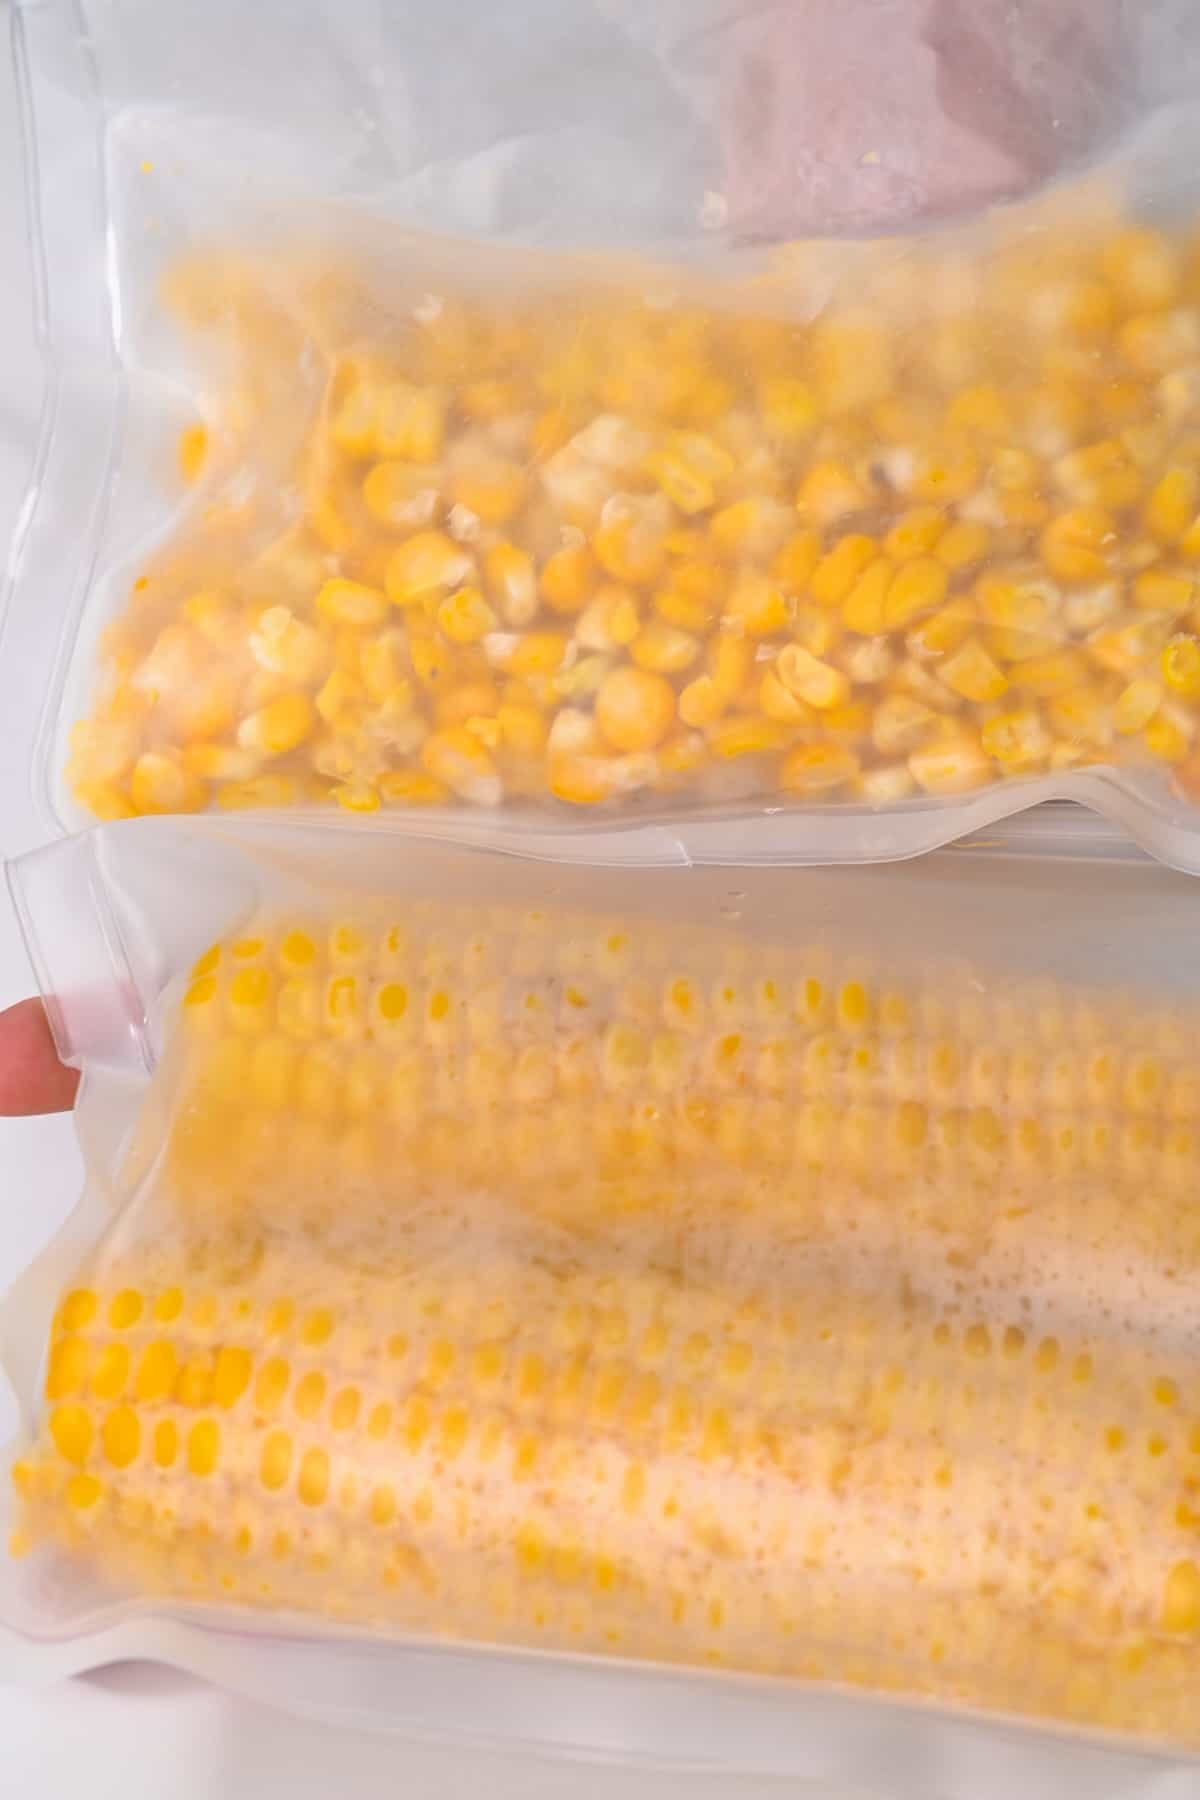 Frozen corn kernels and corn on the cob in freezer bags